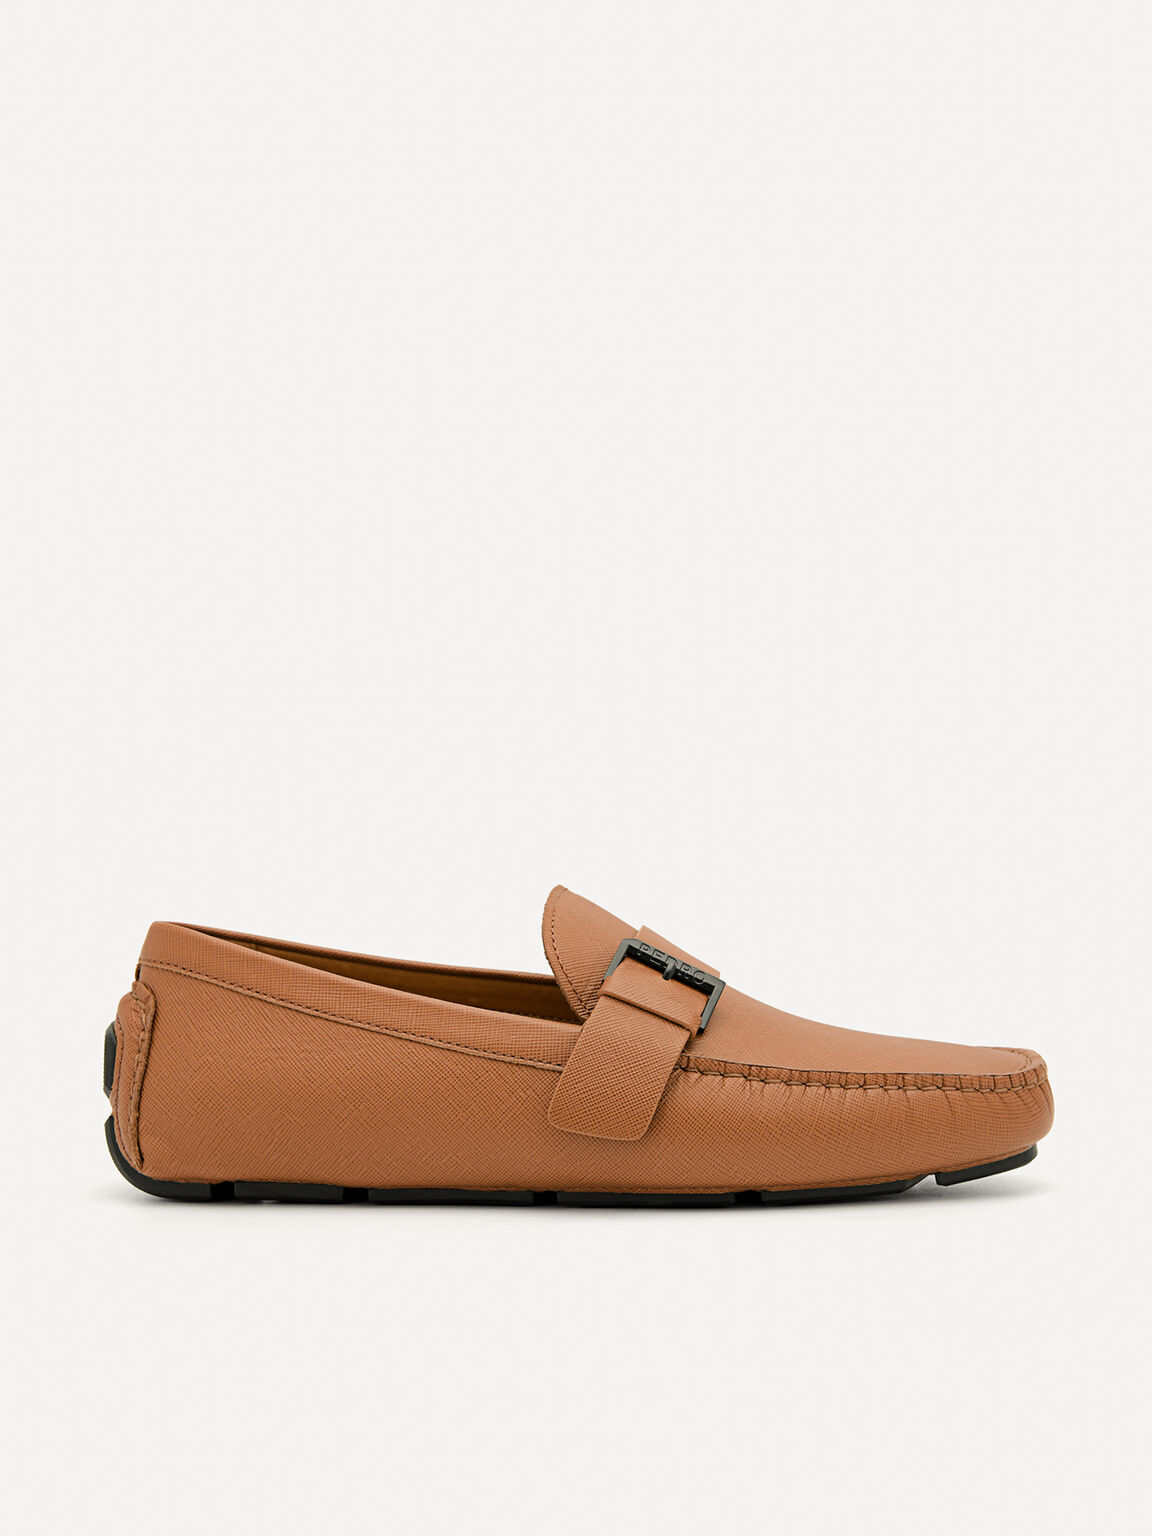 Leather Strap Moccasins, Brown